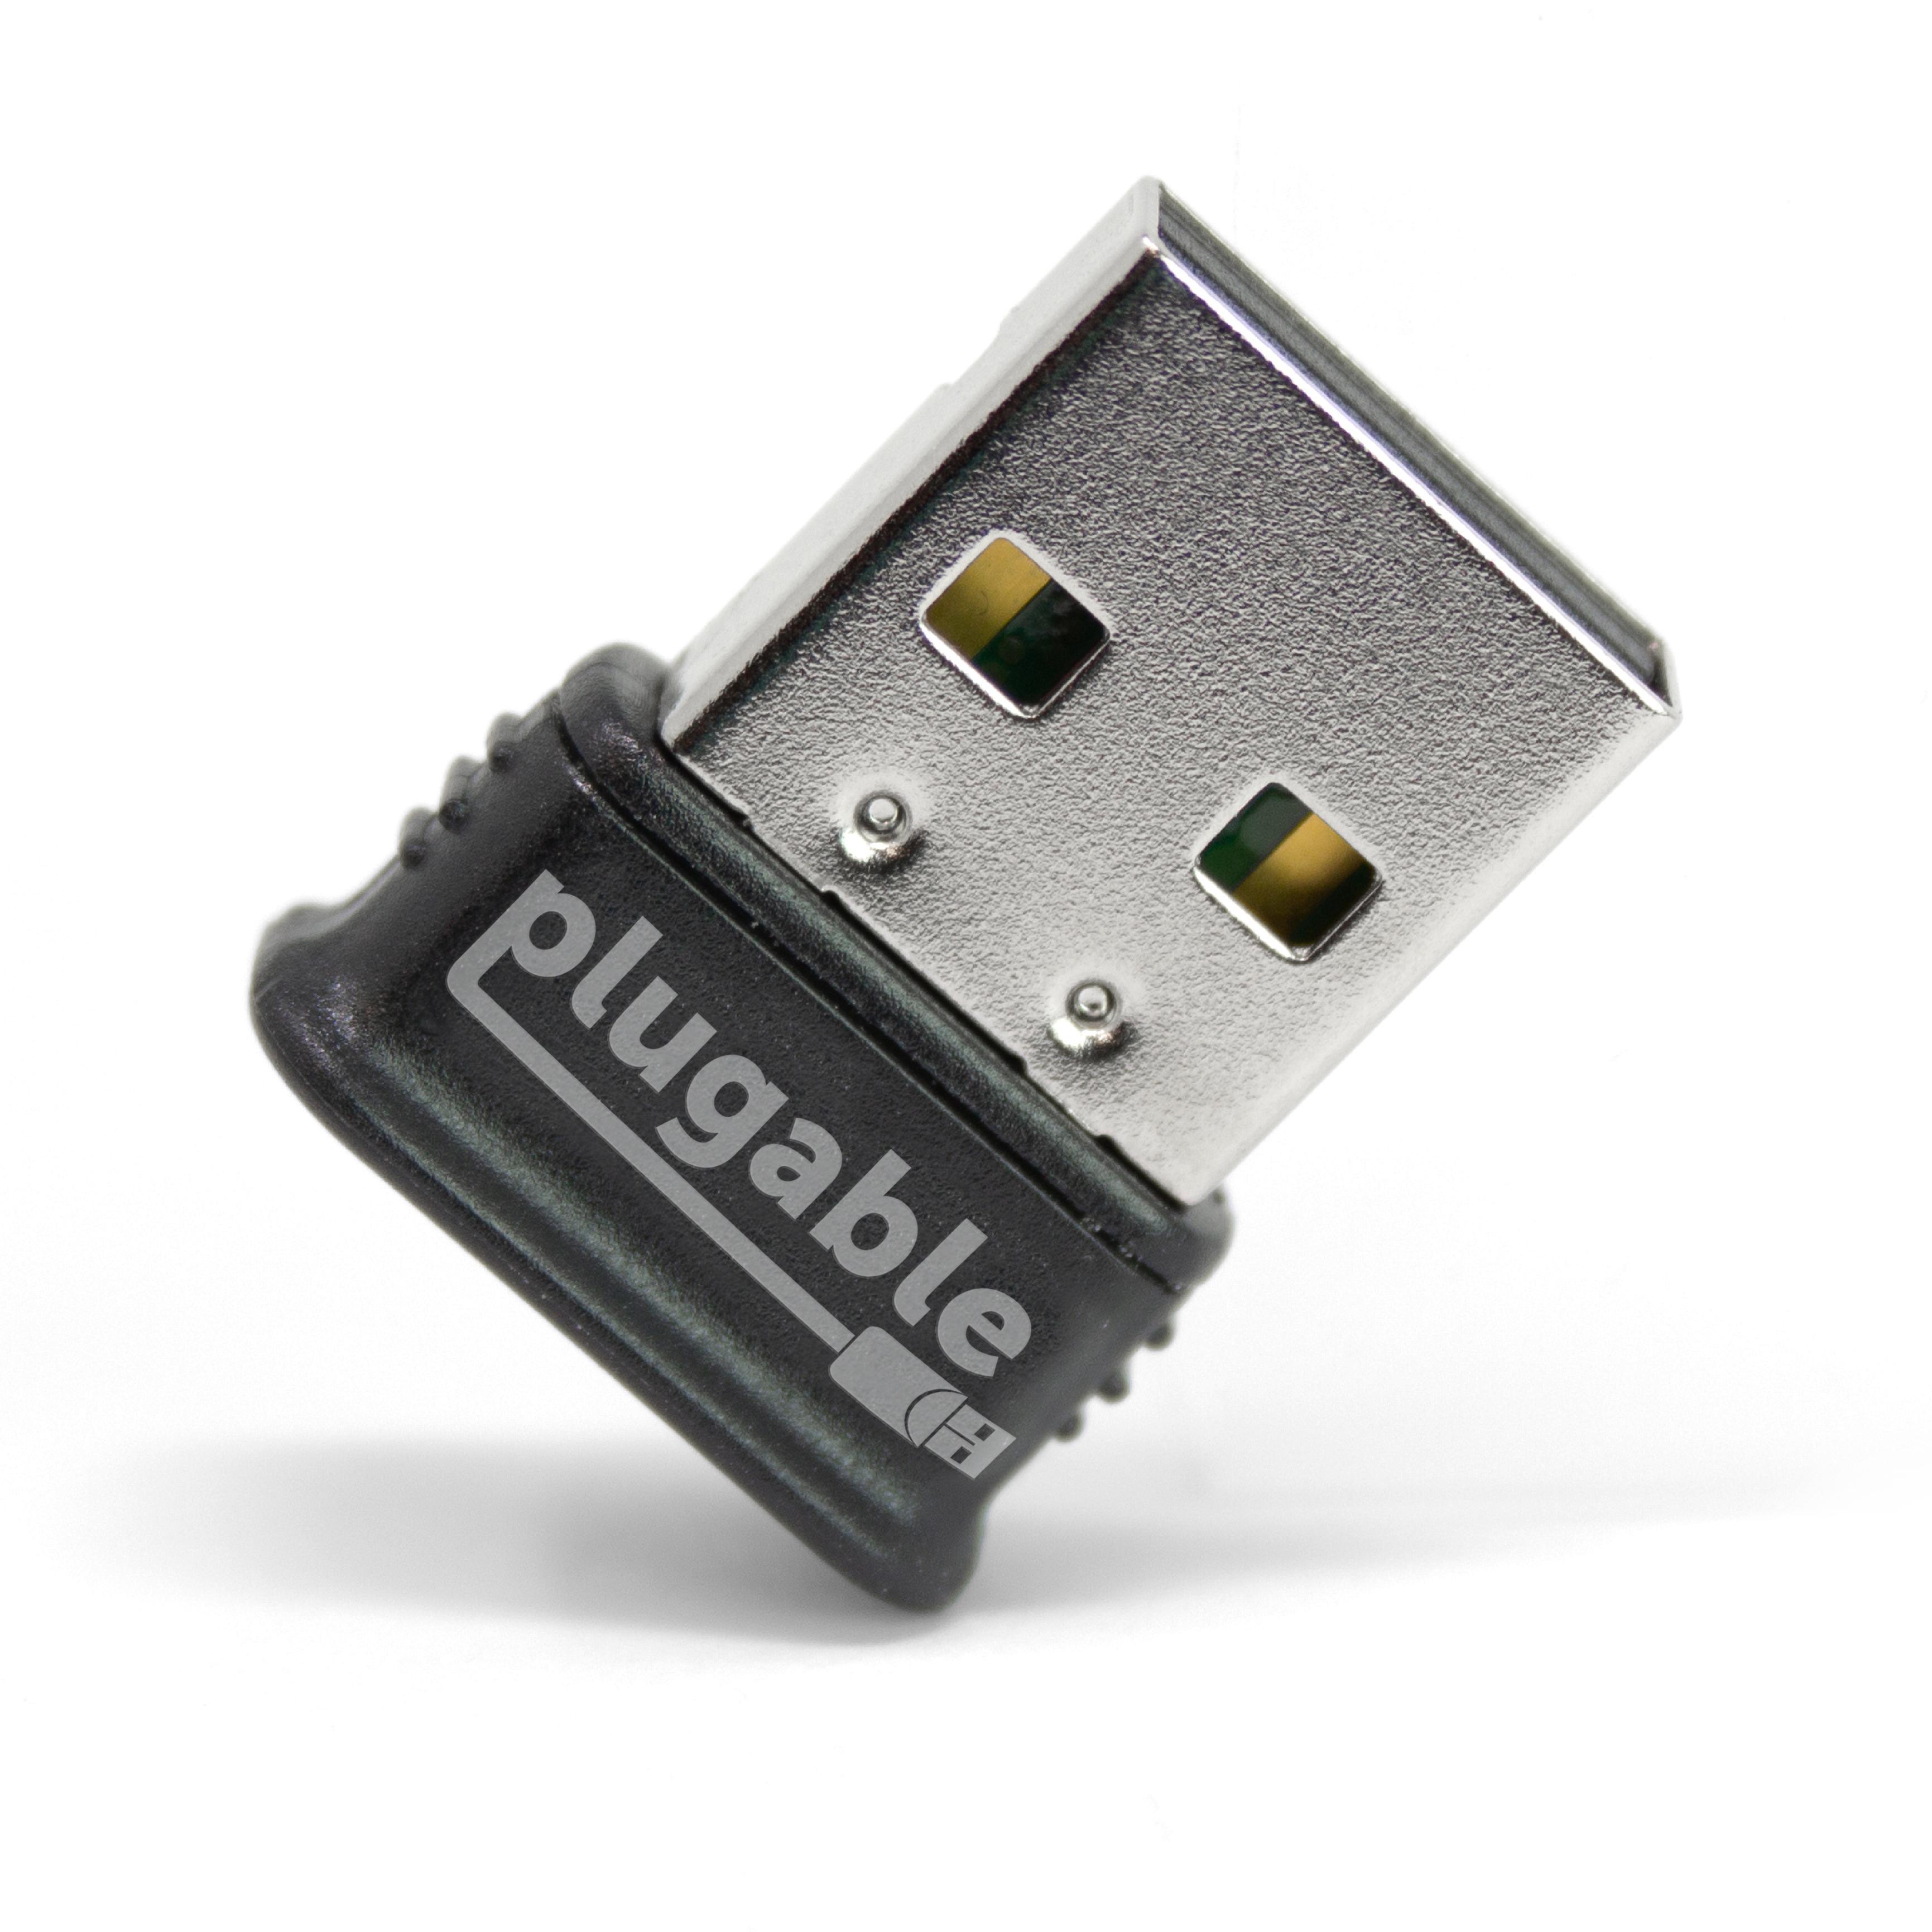 Plugable USB Bluetooth 4.0 Low Energy Micro Adapter (Compatible with Windows 11, 10, 8.x, 7, Classic Bluetooth, Gamepad, and Stereo Headset Compatible) - image 1 of 6